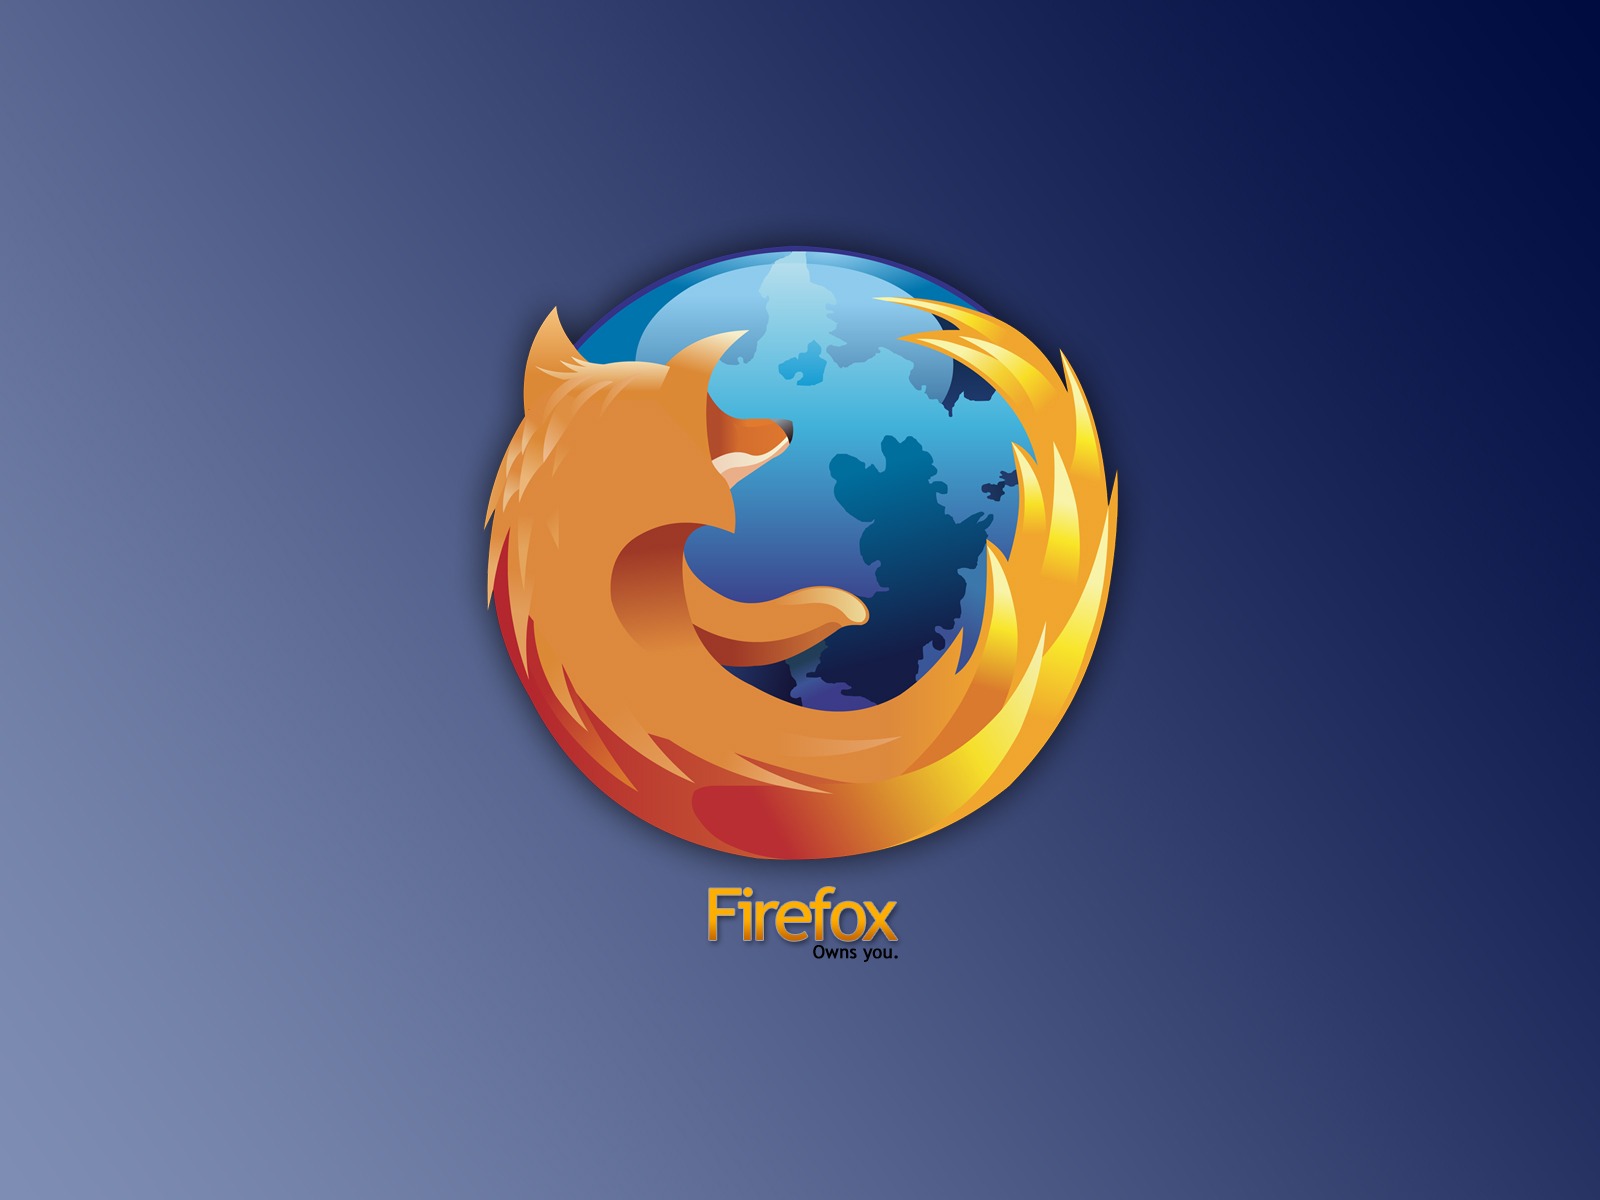 Firefox Owns You Wallpaper Puters